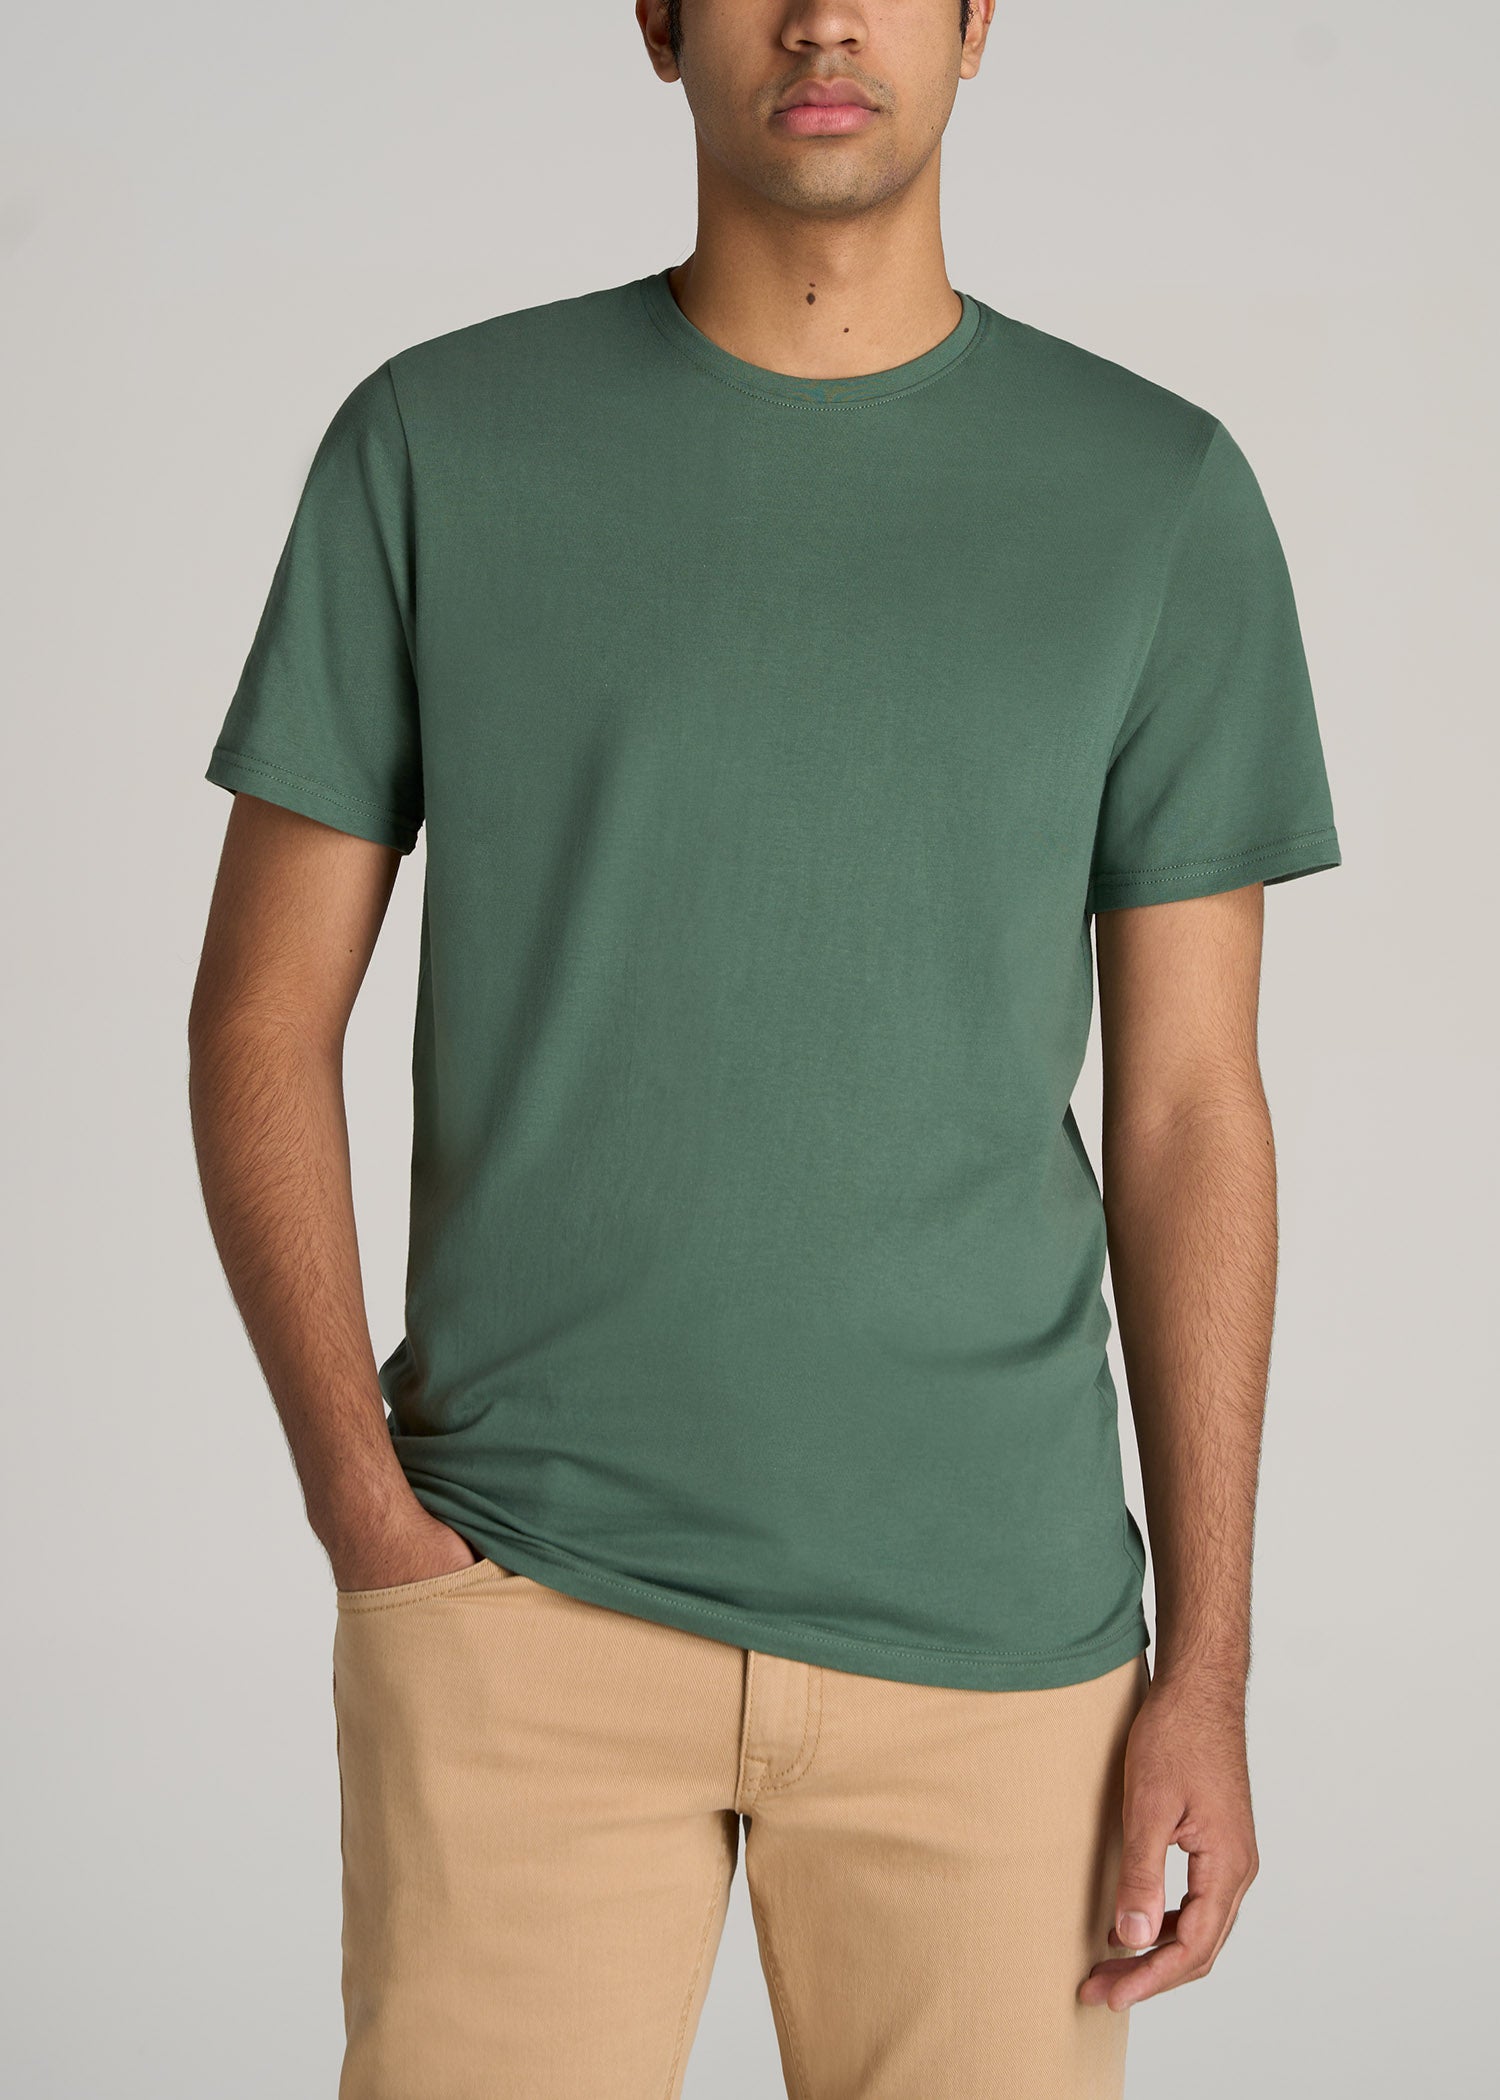 The Everyday REGULAR-FIT Crewneck Tall Men's T-Shirt in Forest Green